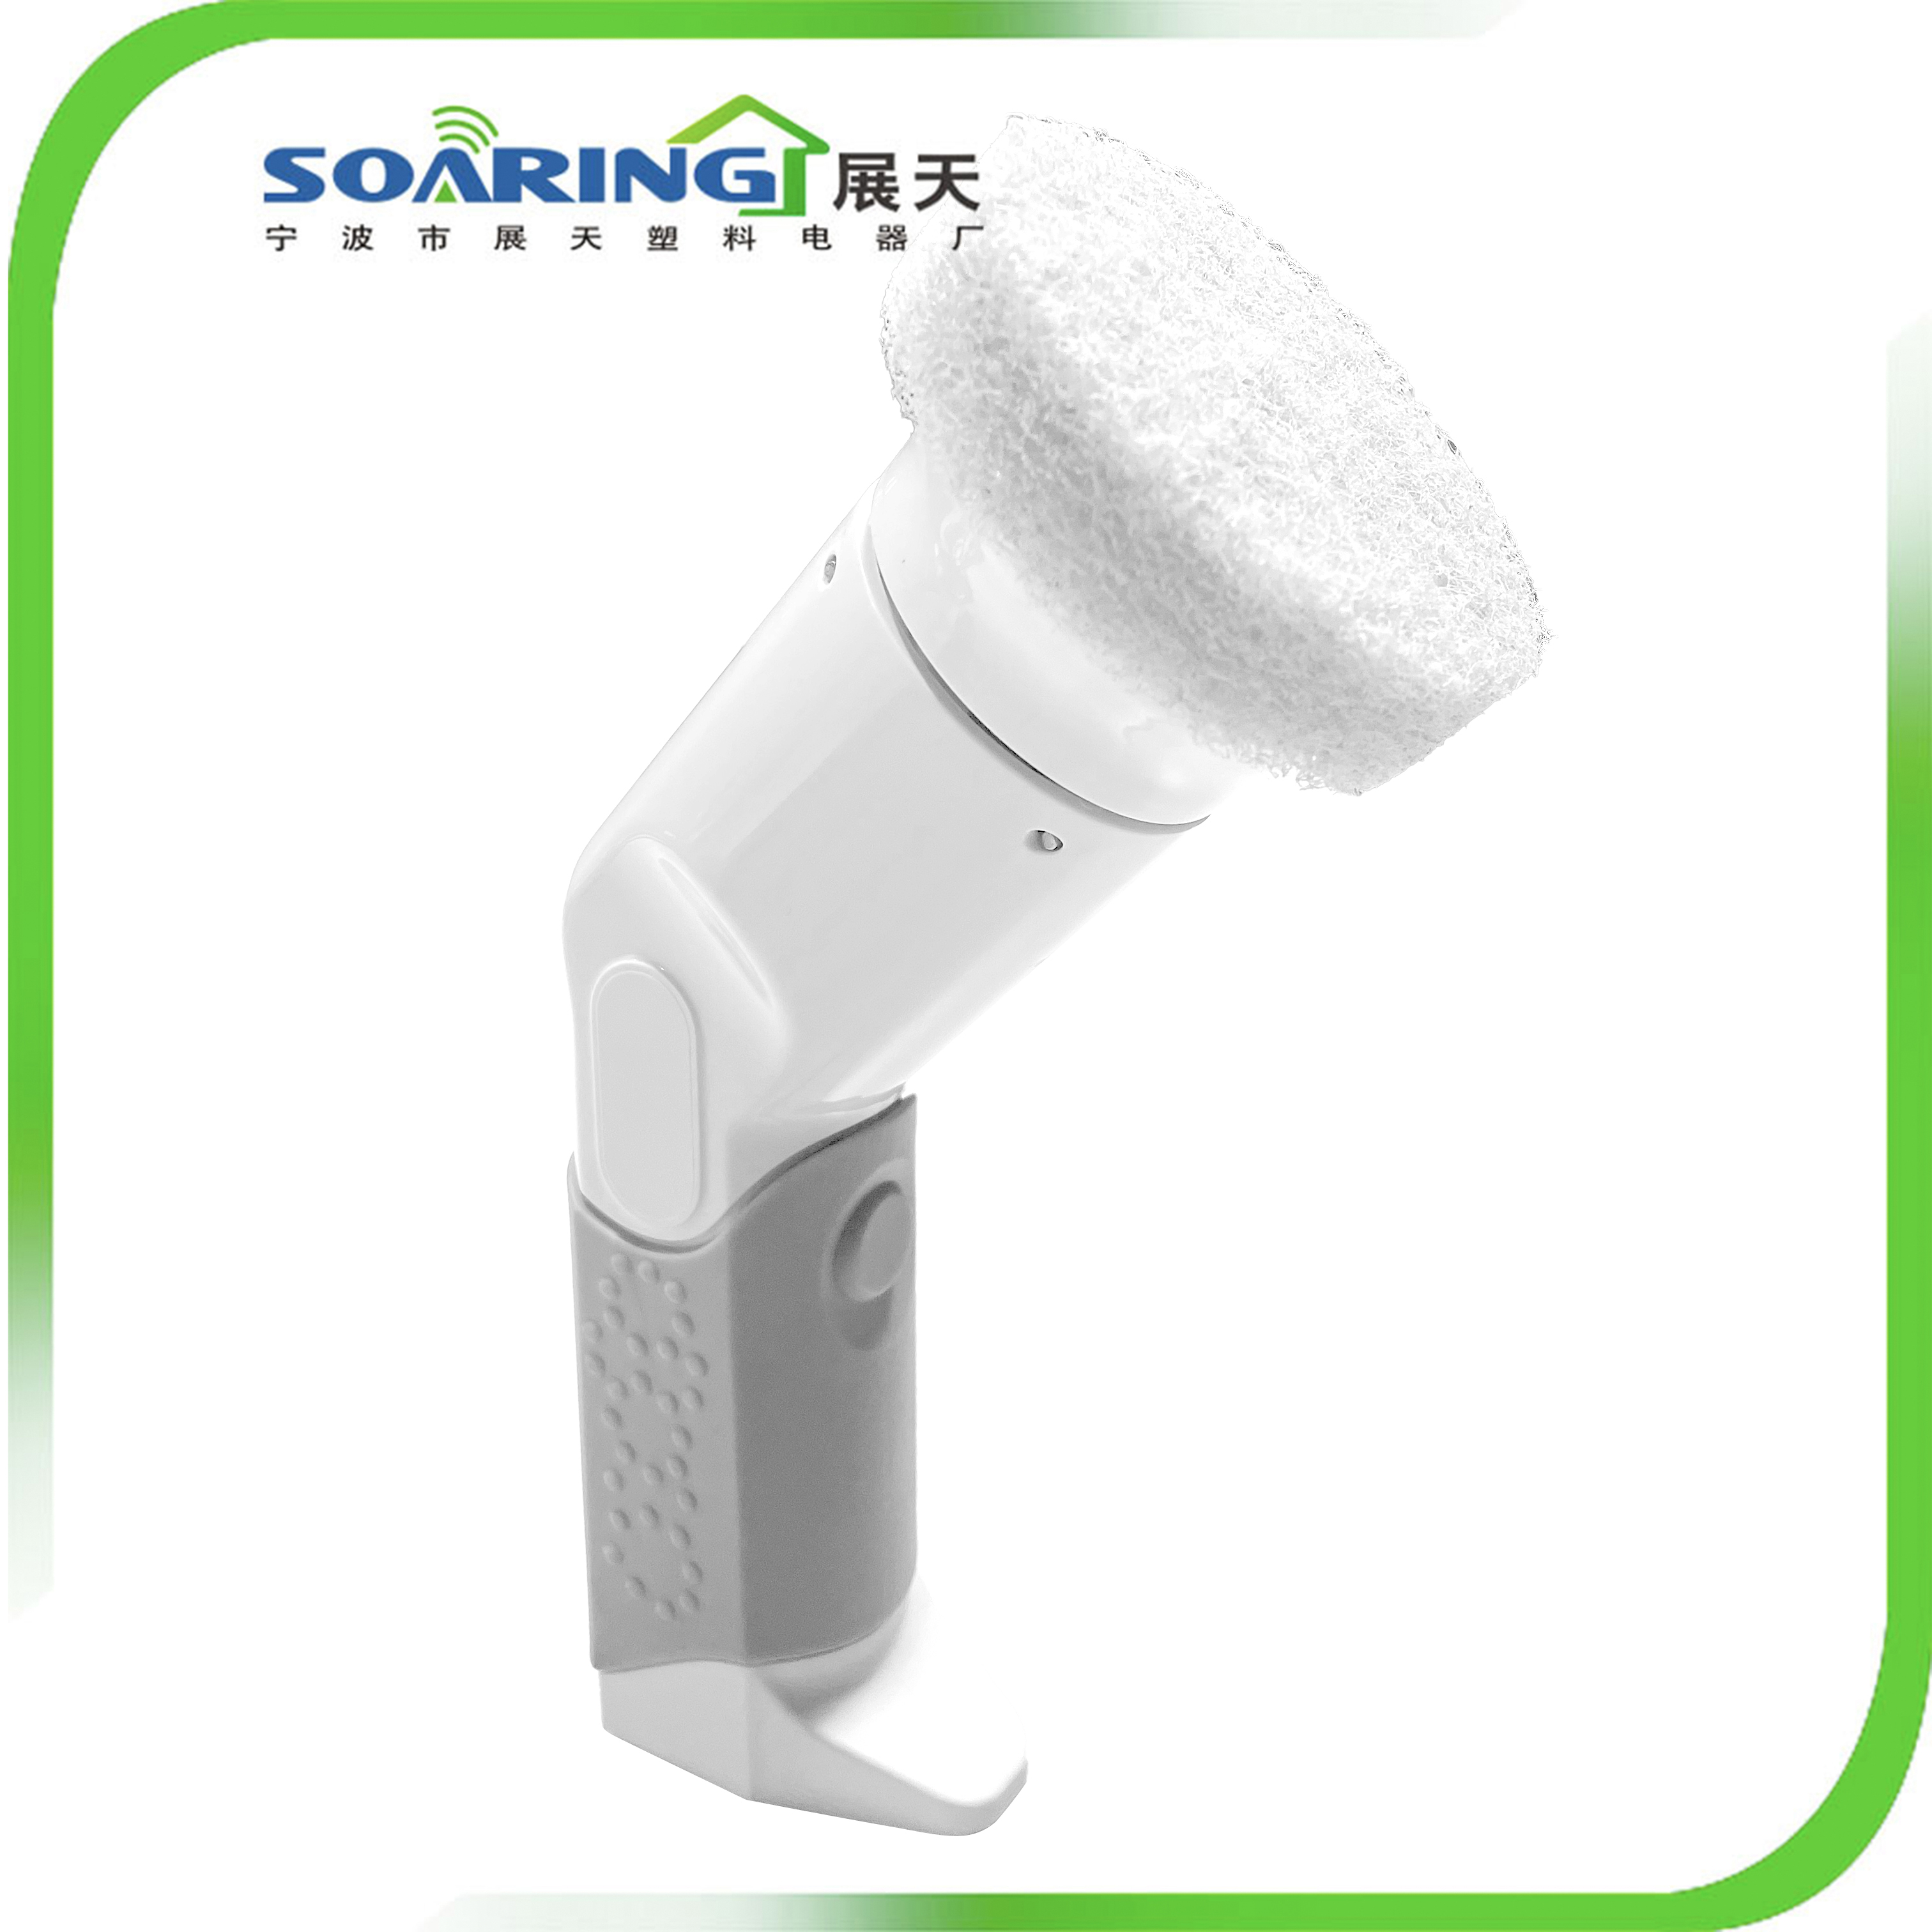 Household Sonic Cleaning Tool Turbo Electronic Spin Power Scrubber Brush Kit - 2